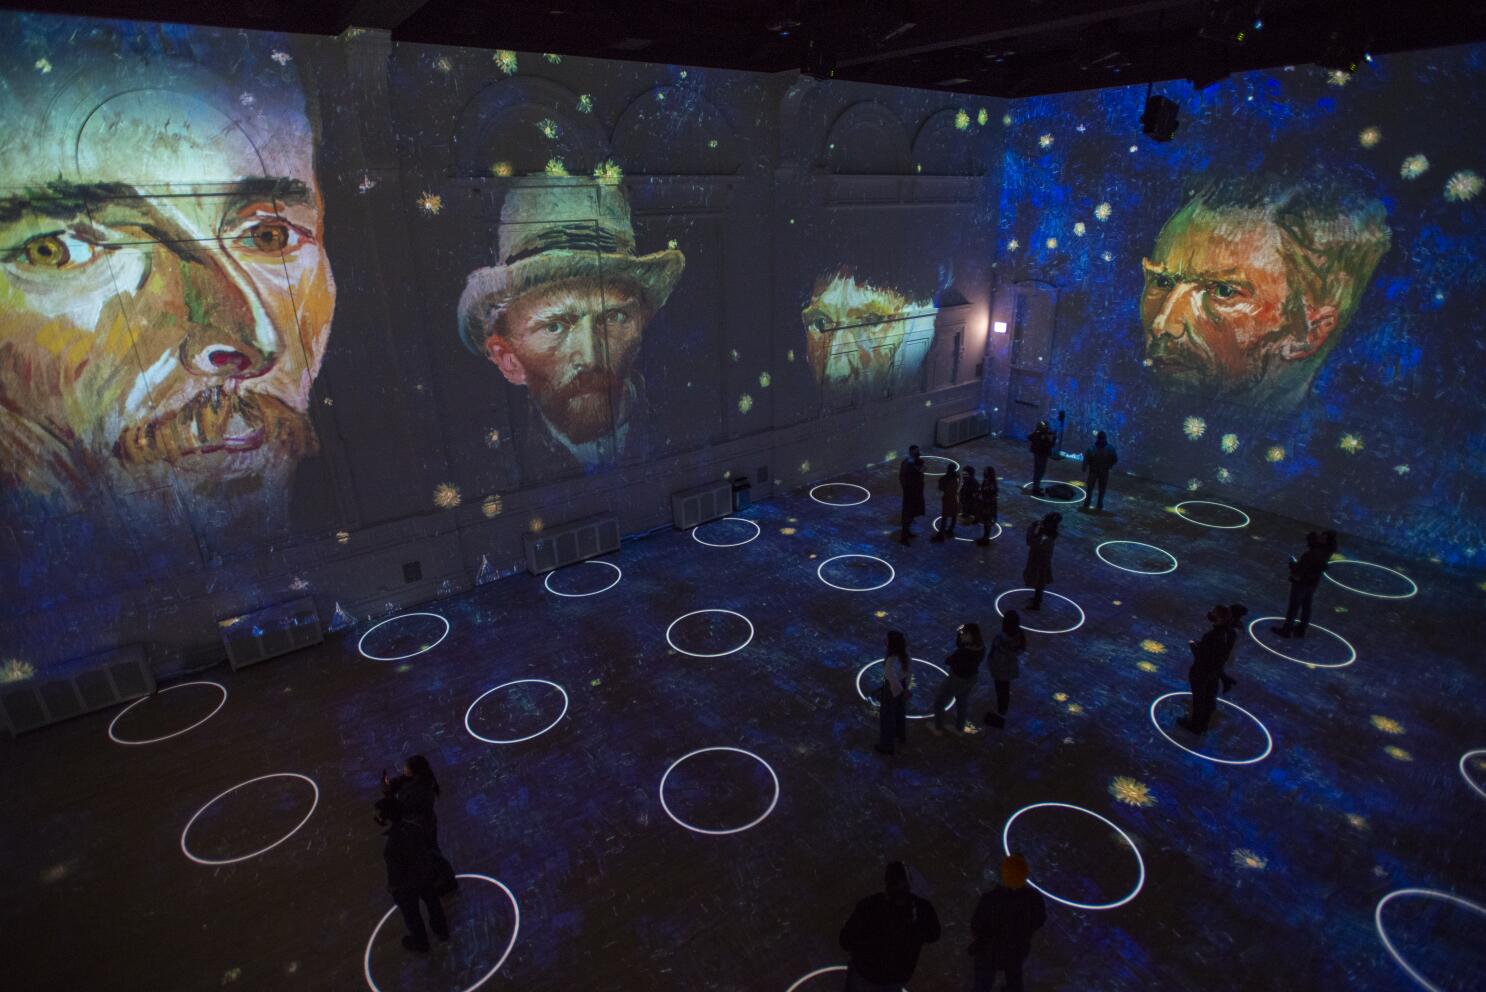 Step Inside a Van Gogh Painting at This Dreamy Exhibit Coming to the U.S.